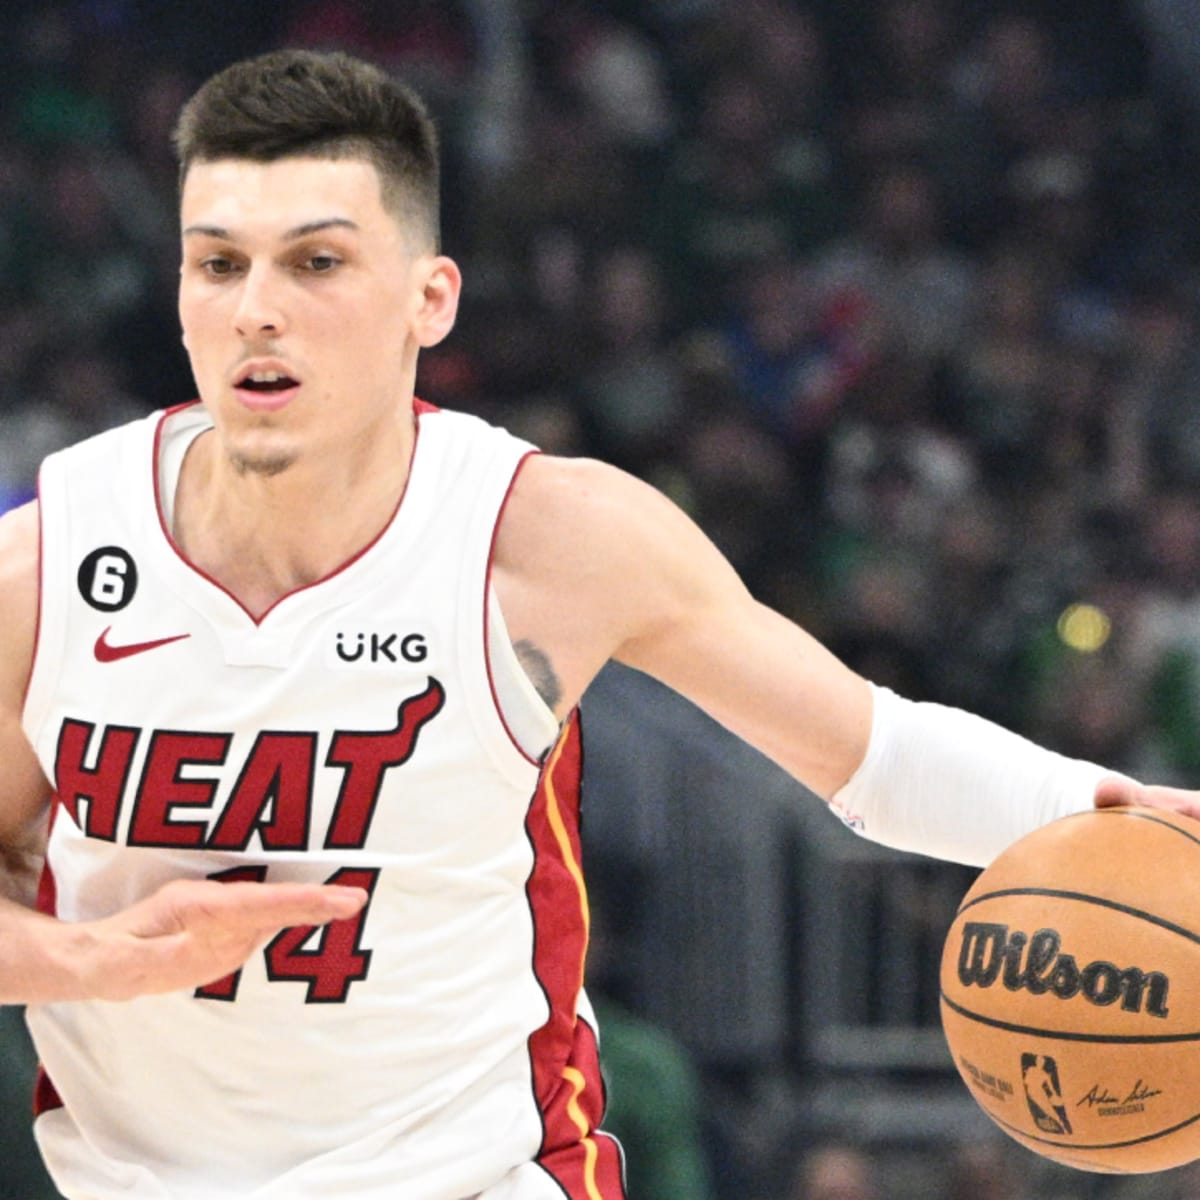 Miami Heat's Tyler Herro expected to return in Game 3 of the NBA